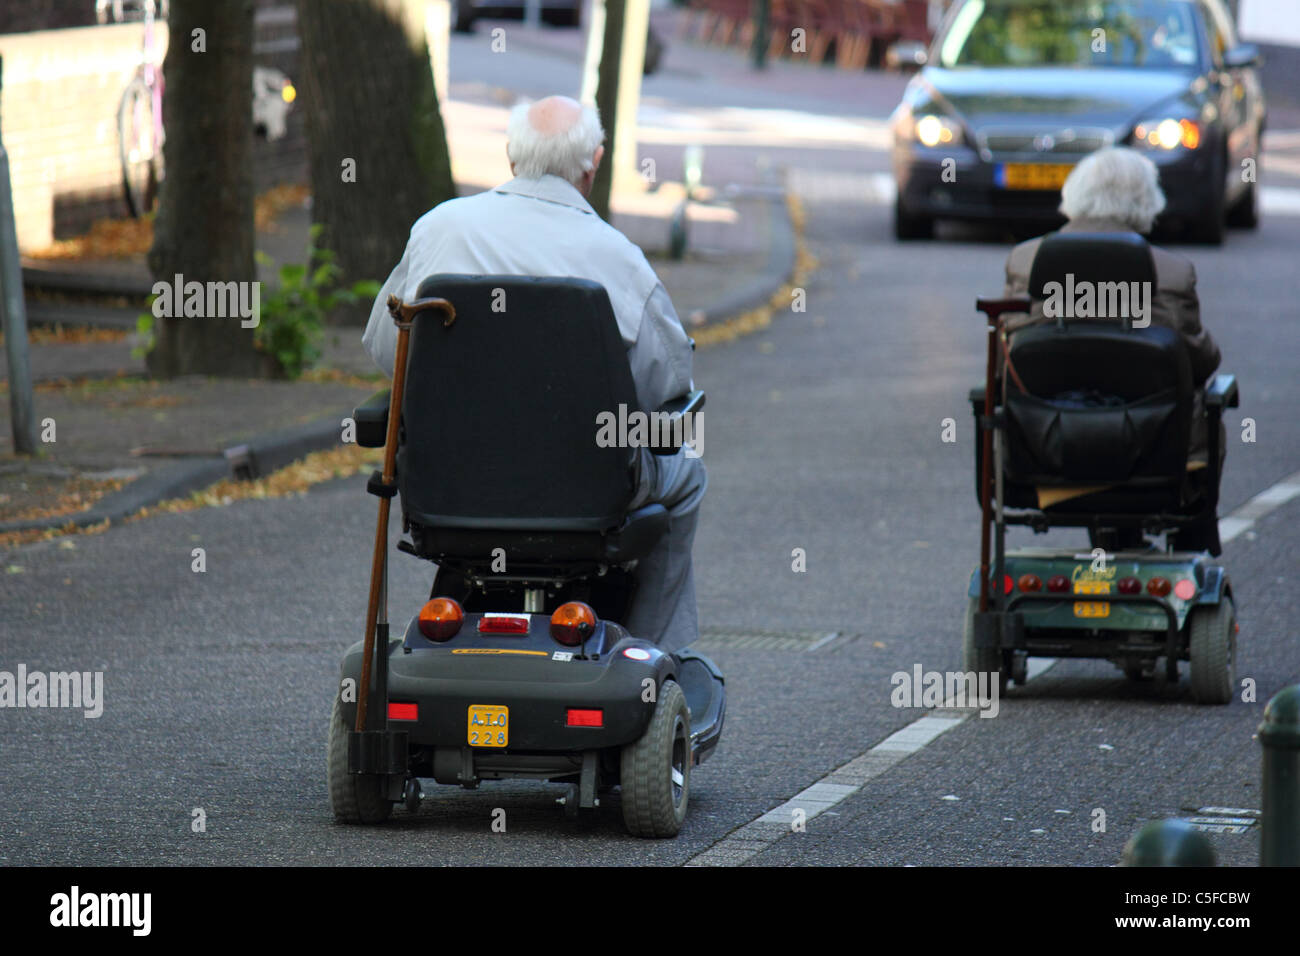 two elderly persons on a scooter trip in the city, conceptual image Stock Photo